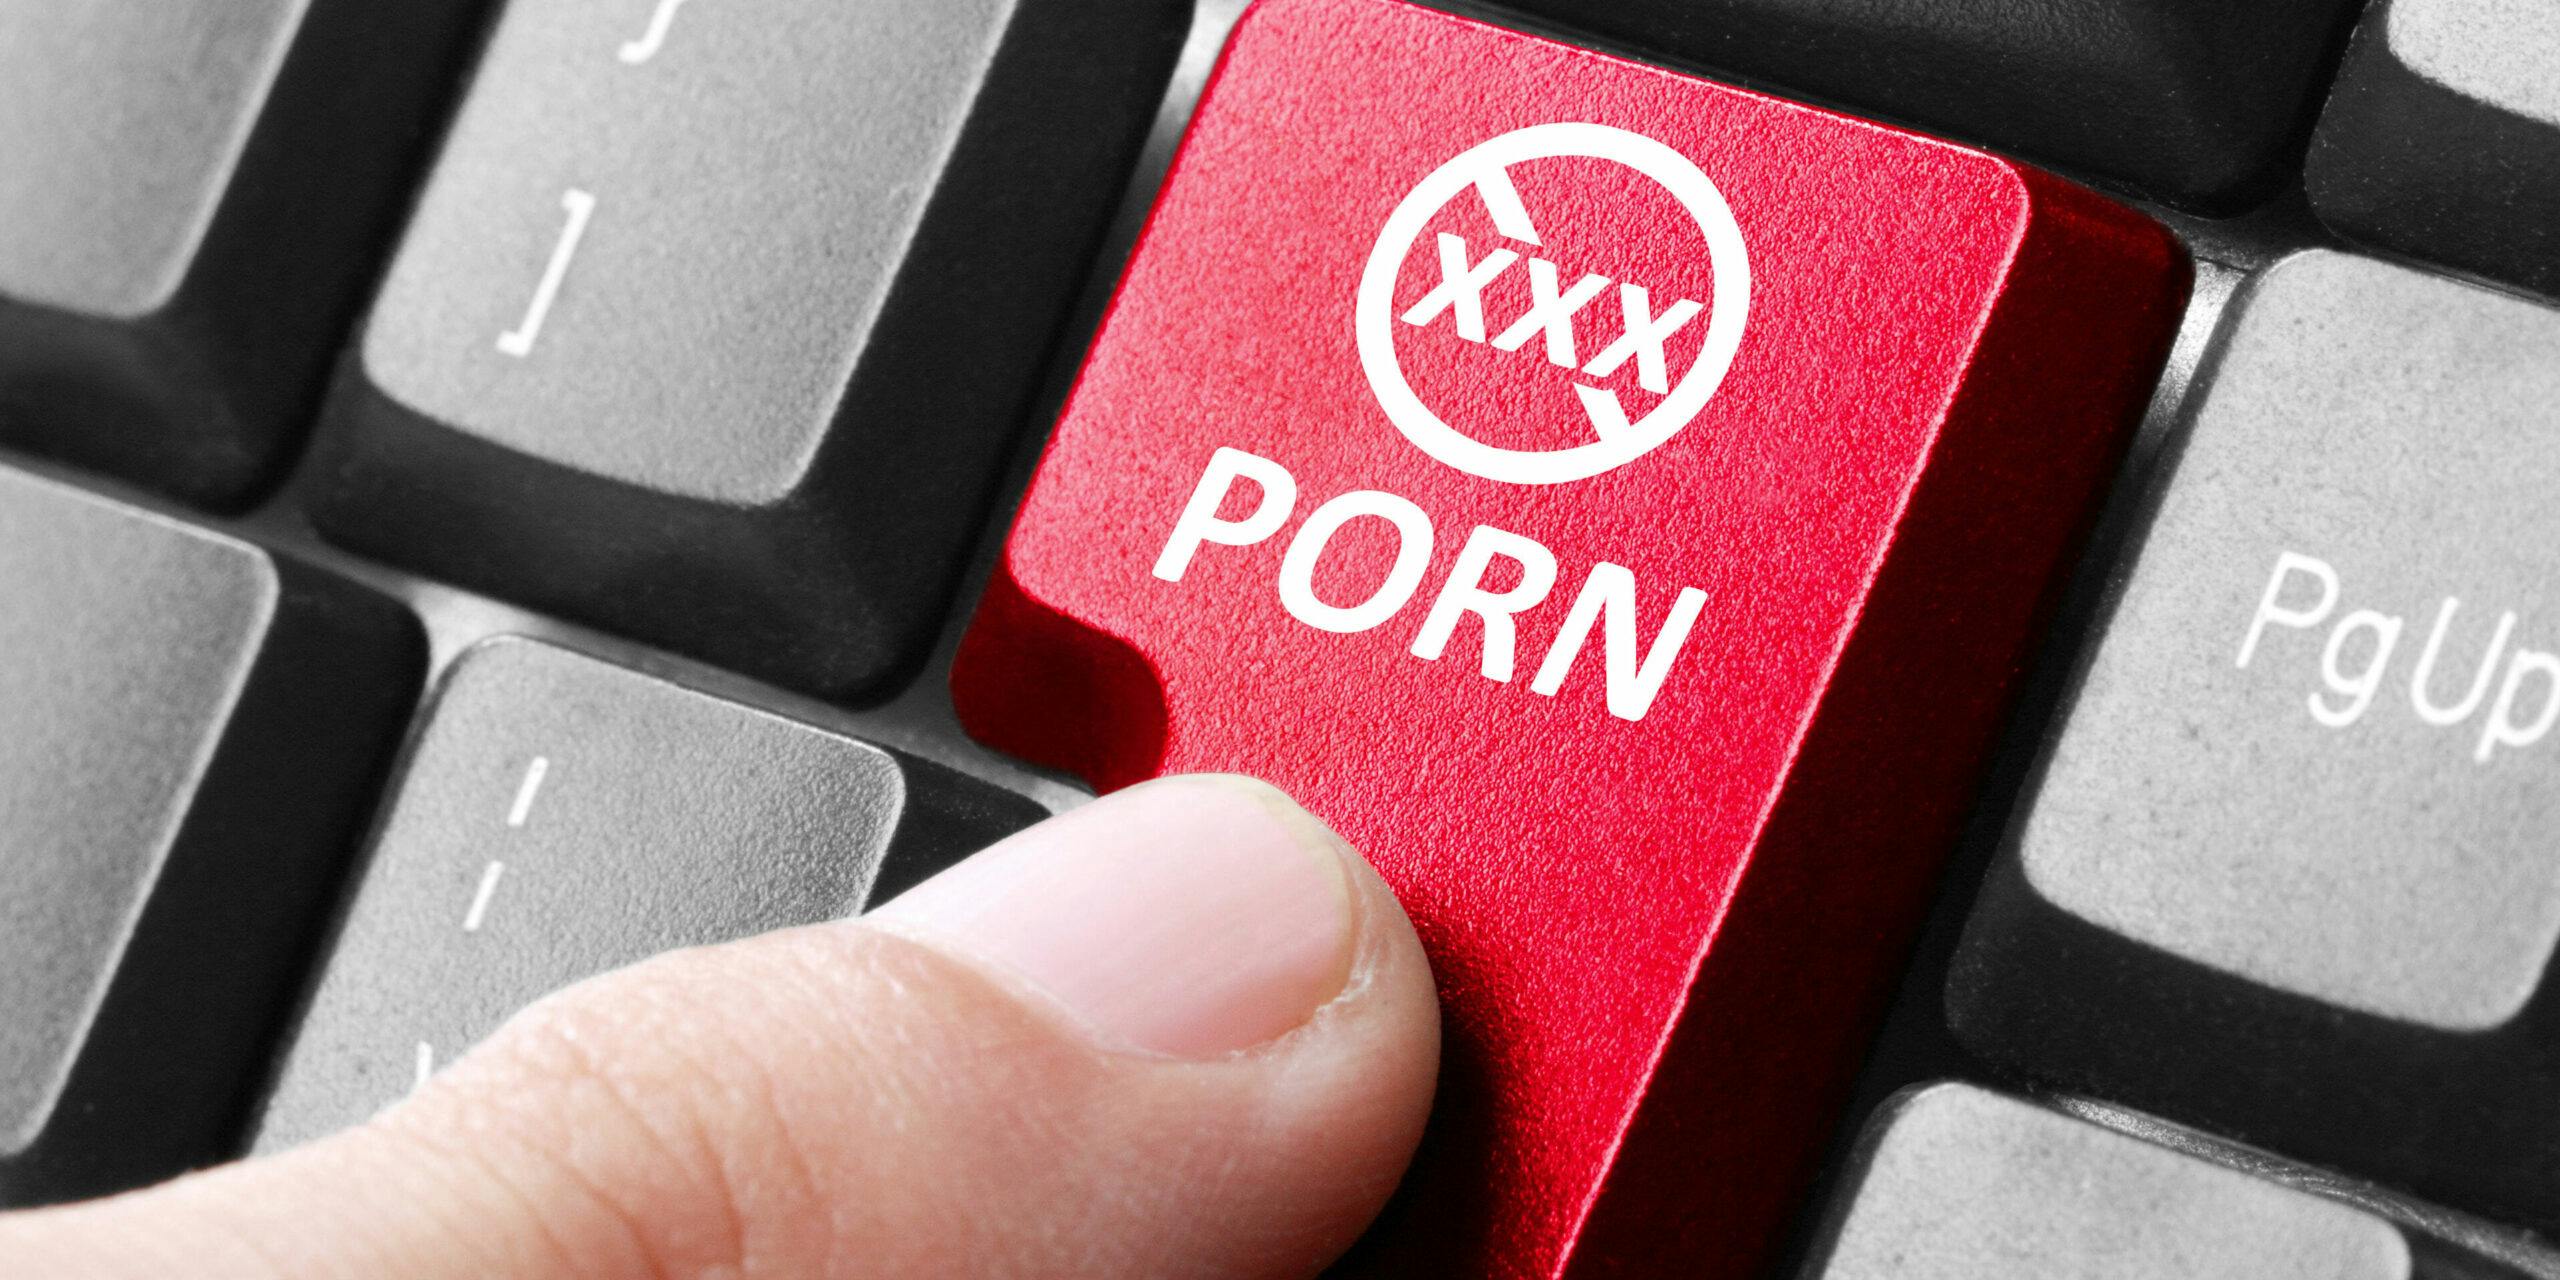 Rhode Island wants to charge citizens $20 to access internet porn